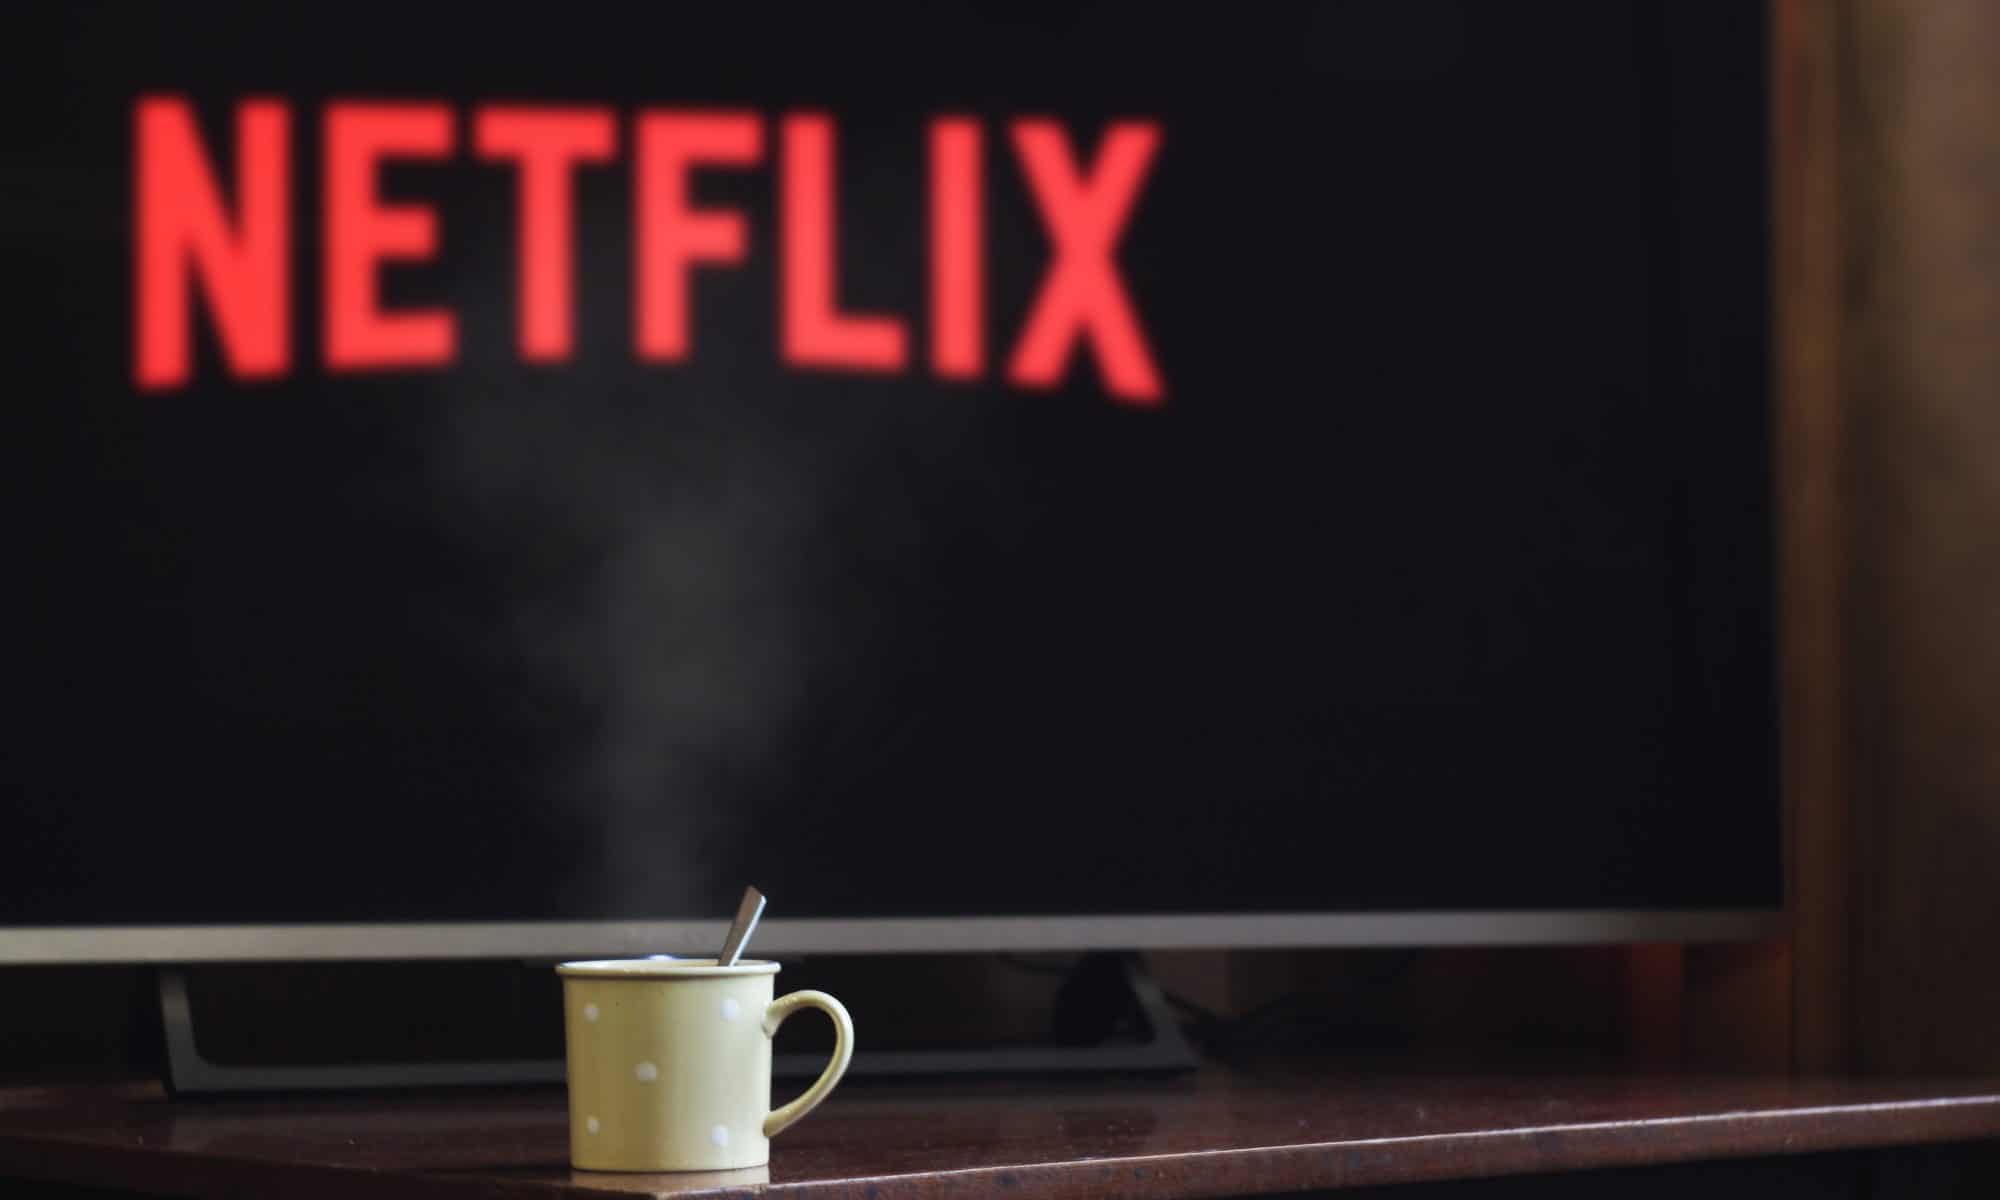 A mug sitting in front of a TV that is showing the Netflix logo